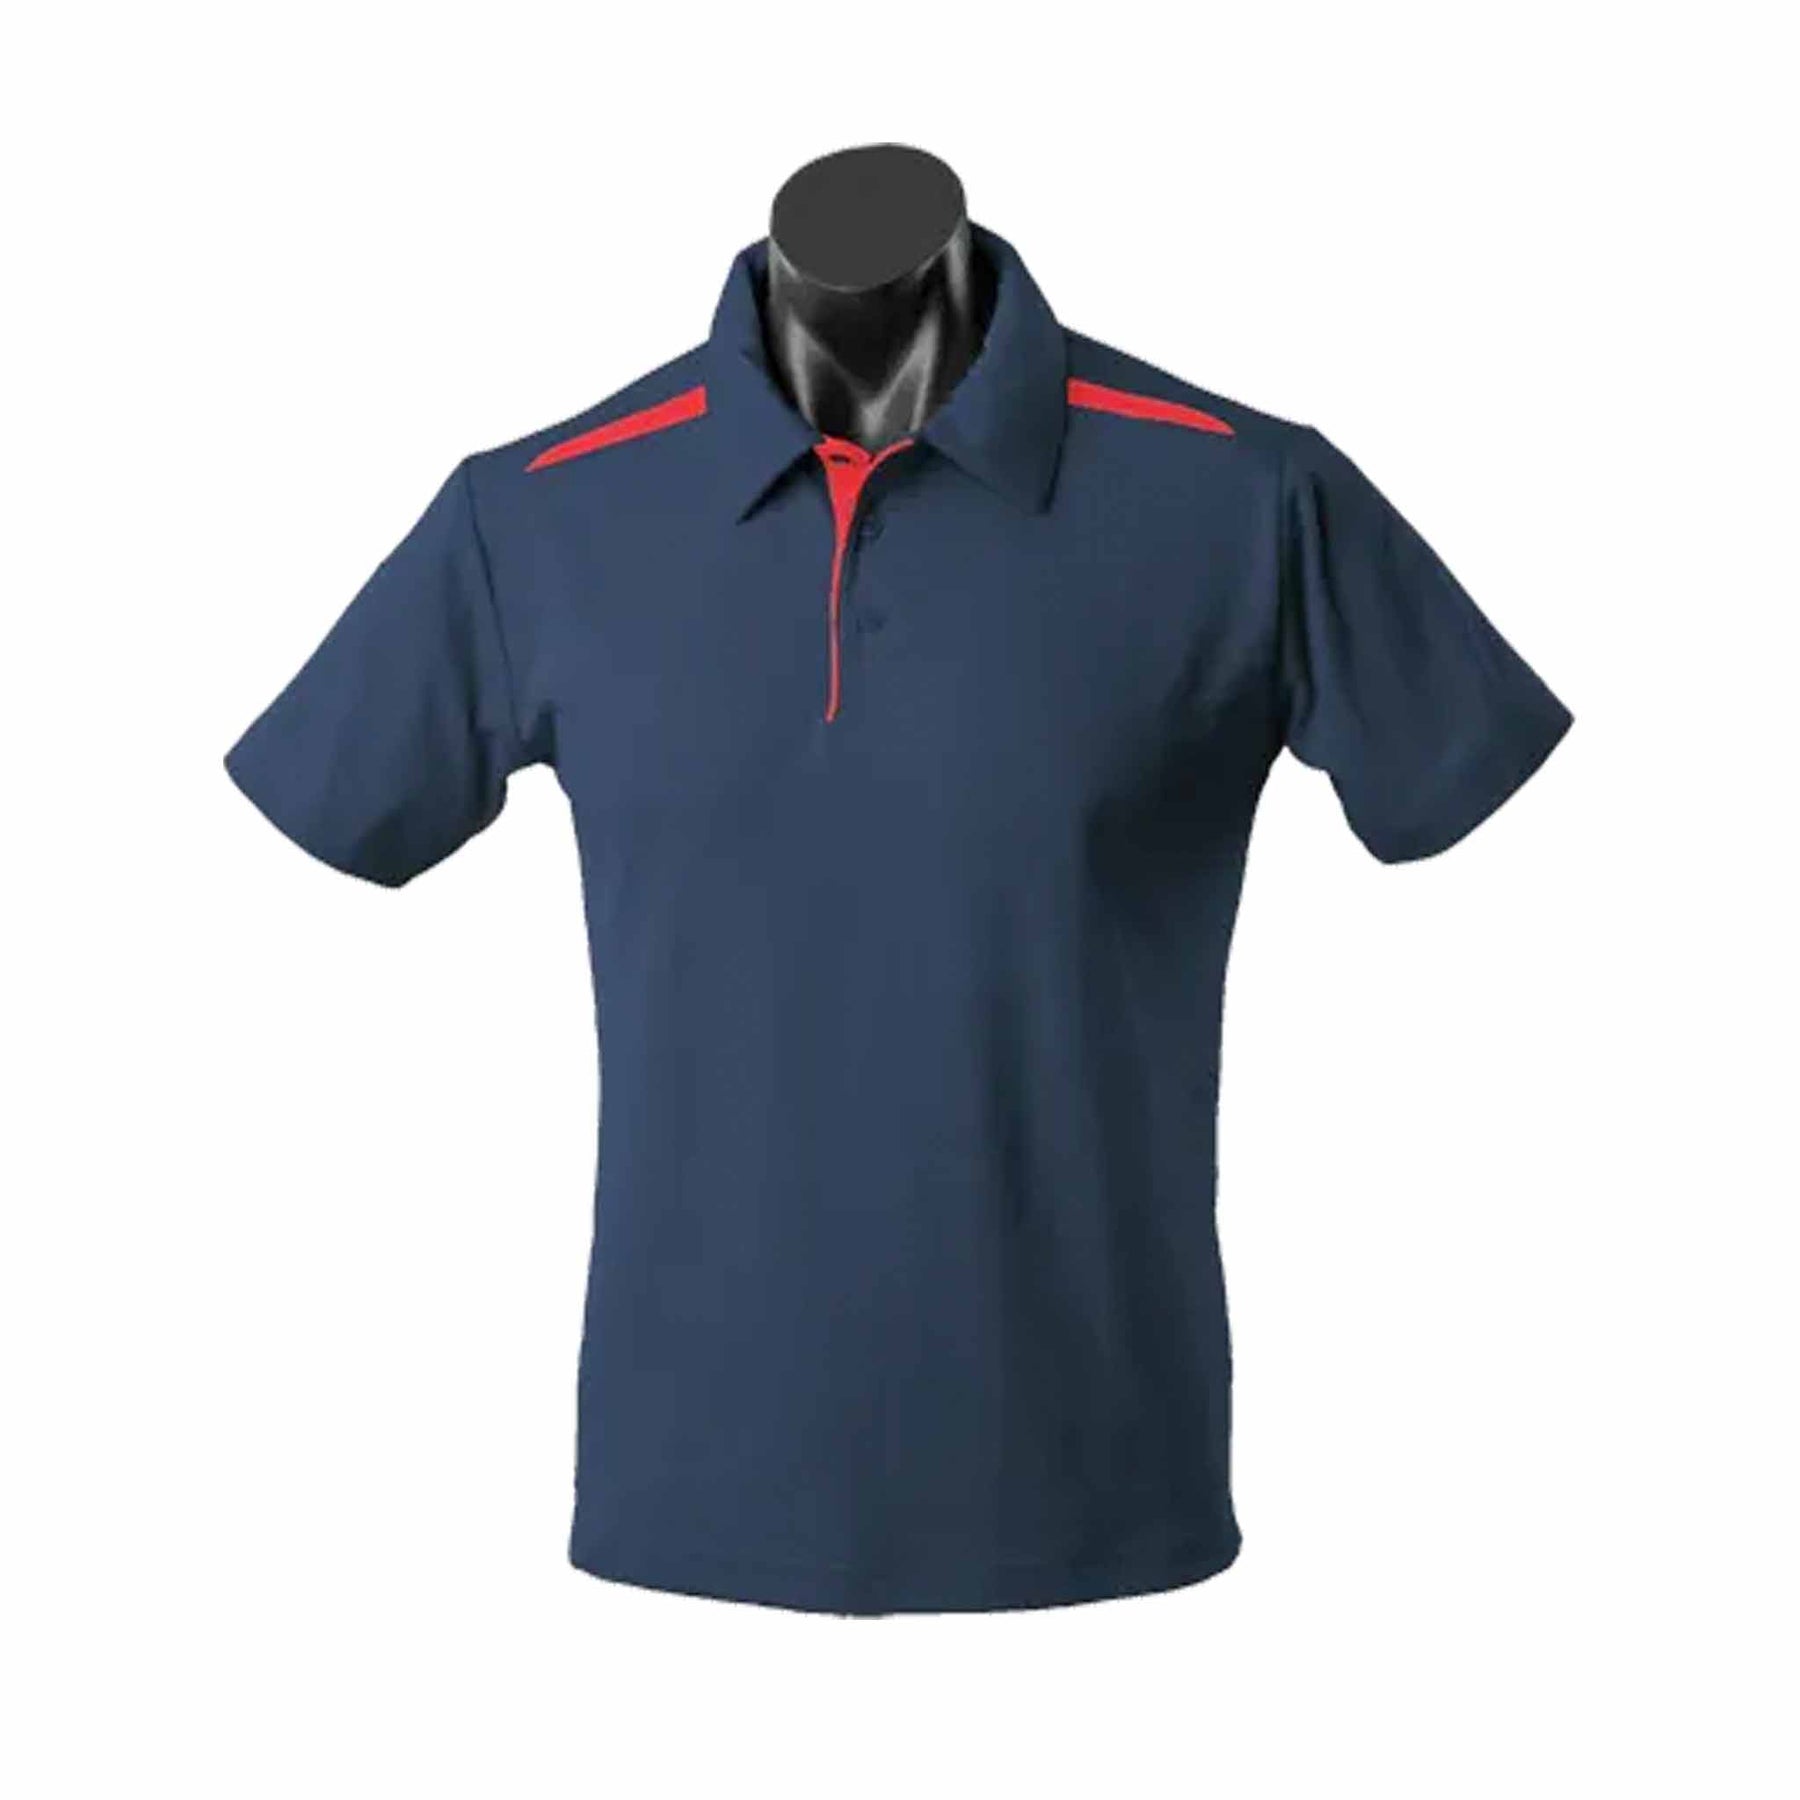 aussie pacific paterson mens polo in navy red